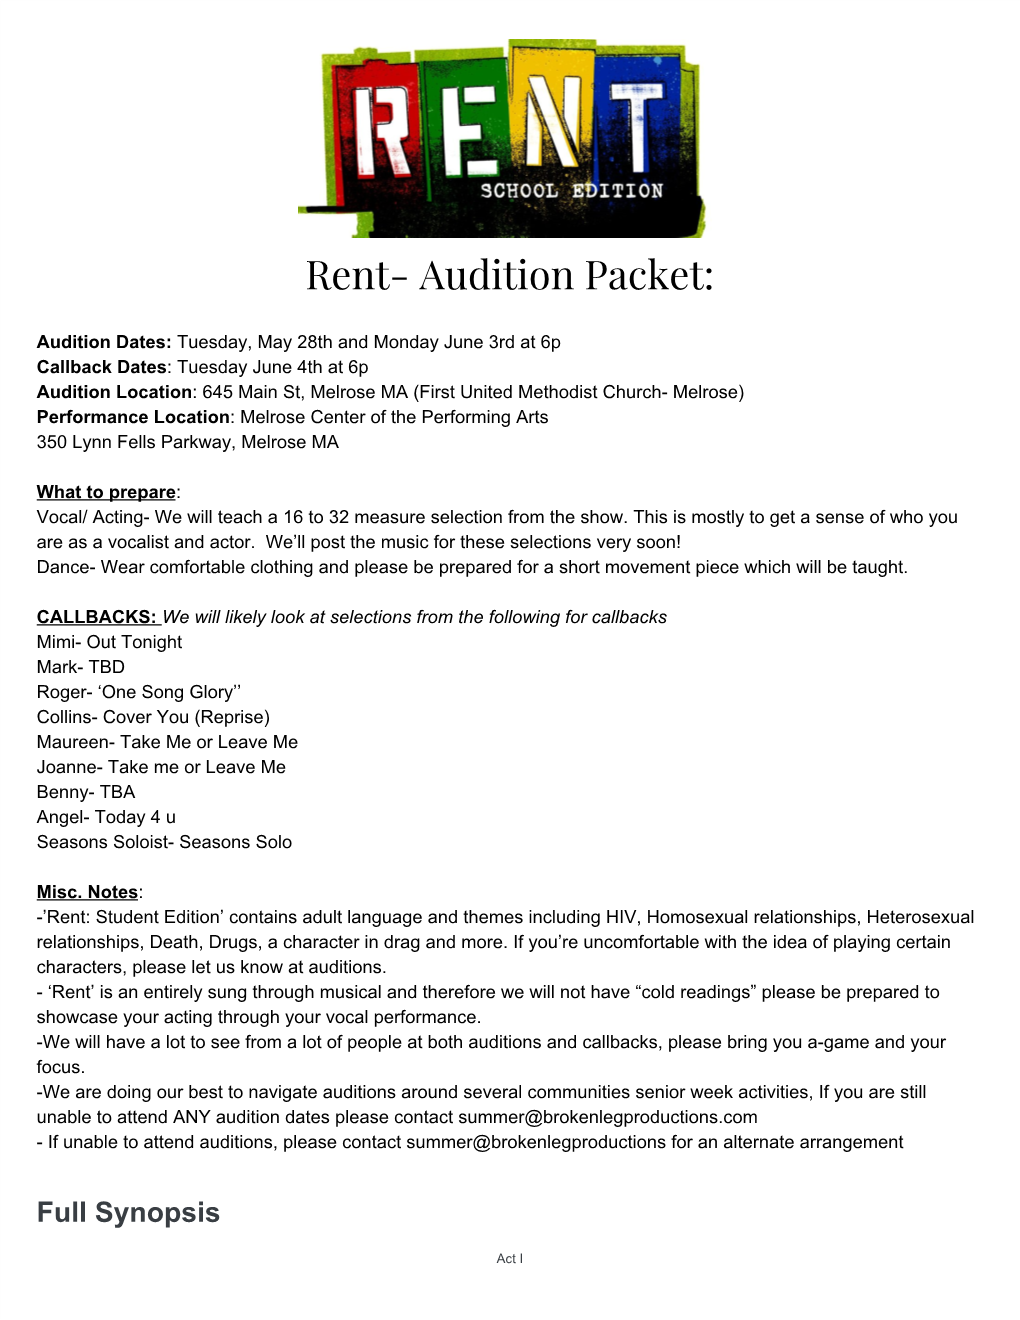 Rent- Audition Packet